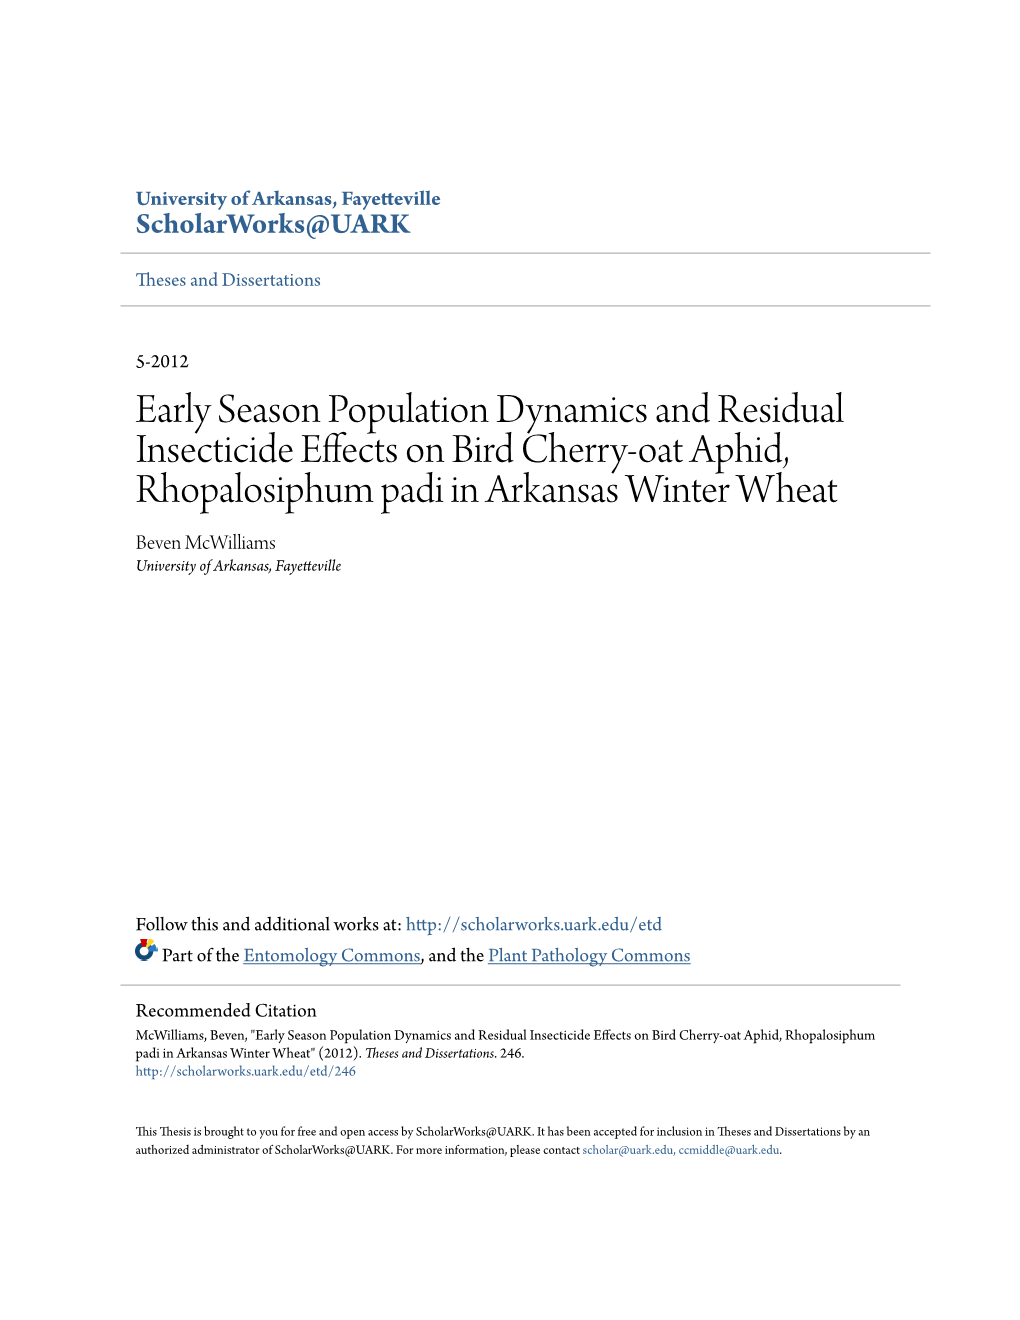 Early Season Population Dynamics and Residual Insecticide Effects on Bird Cherry-Oat Aphid, Rhopalosiphum Padi in Arkansas Winte